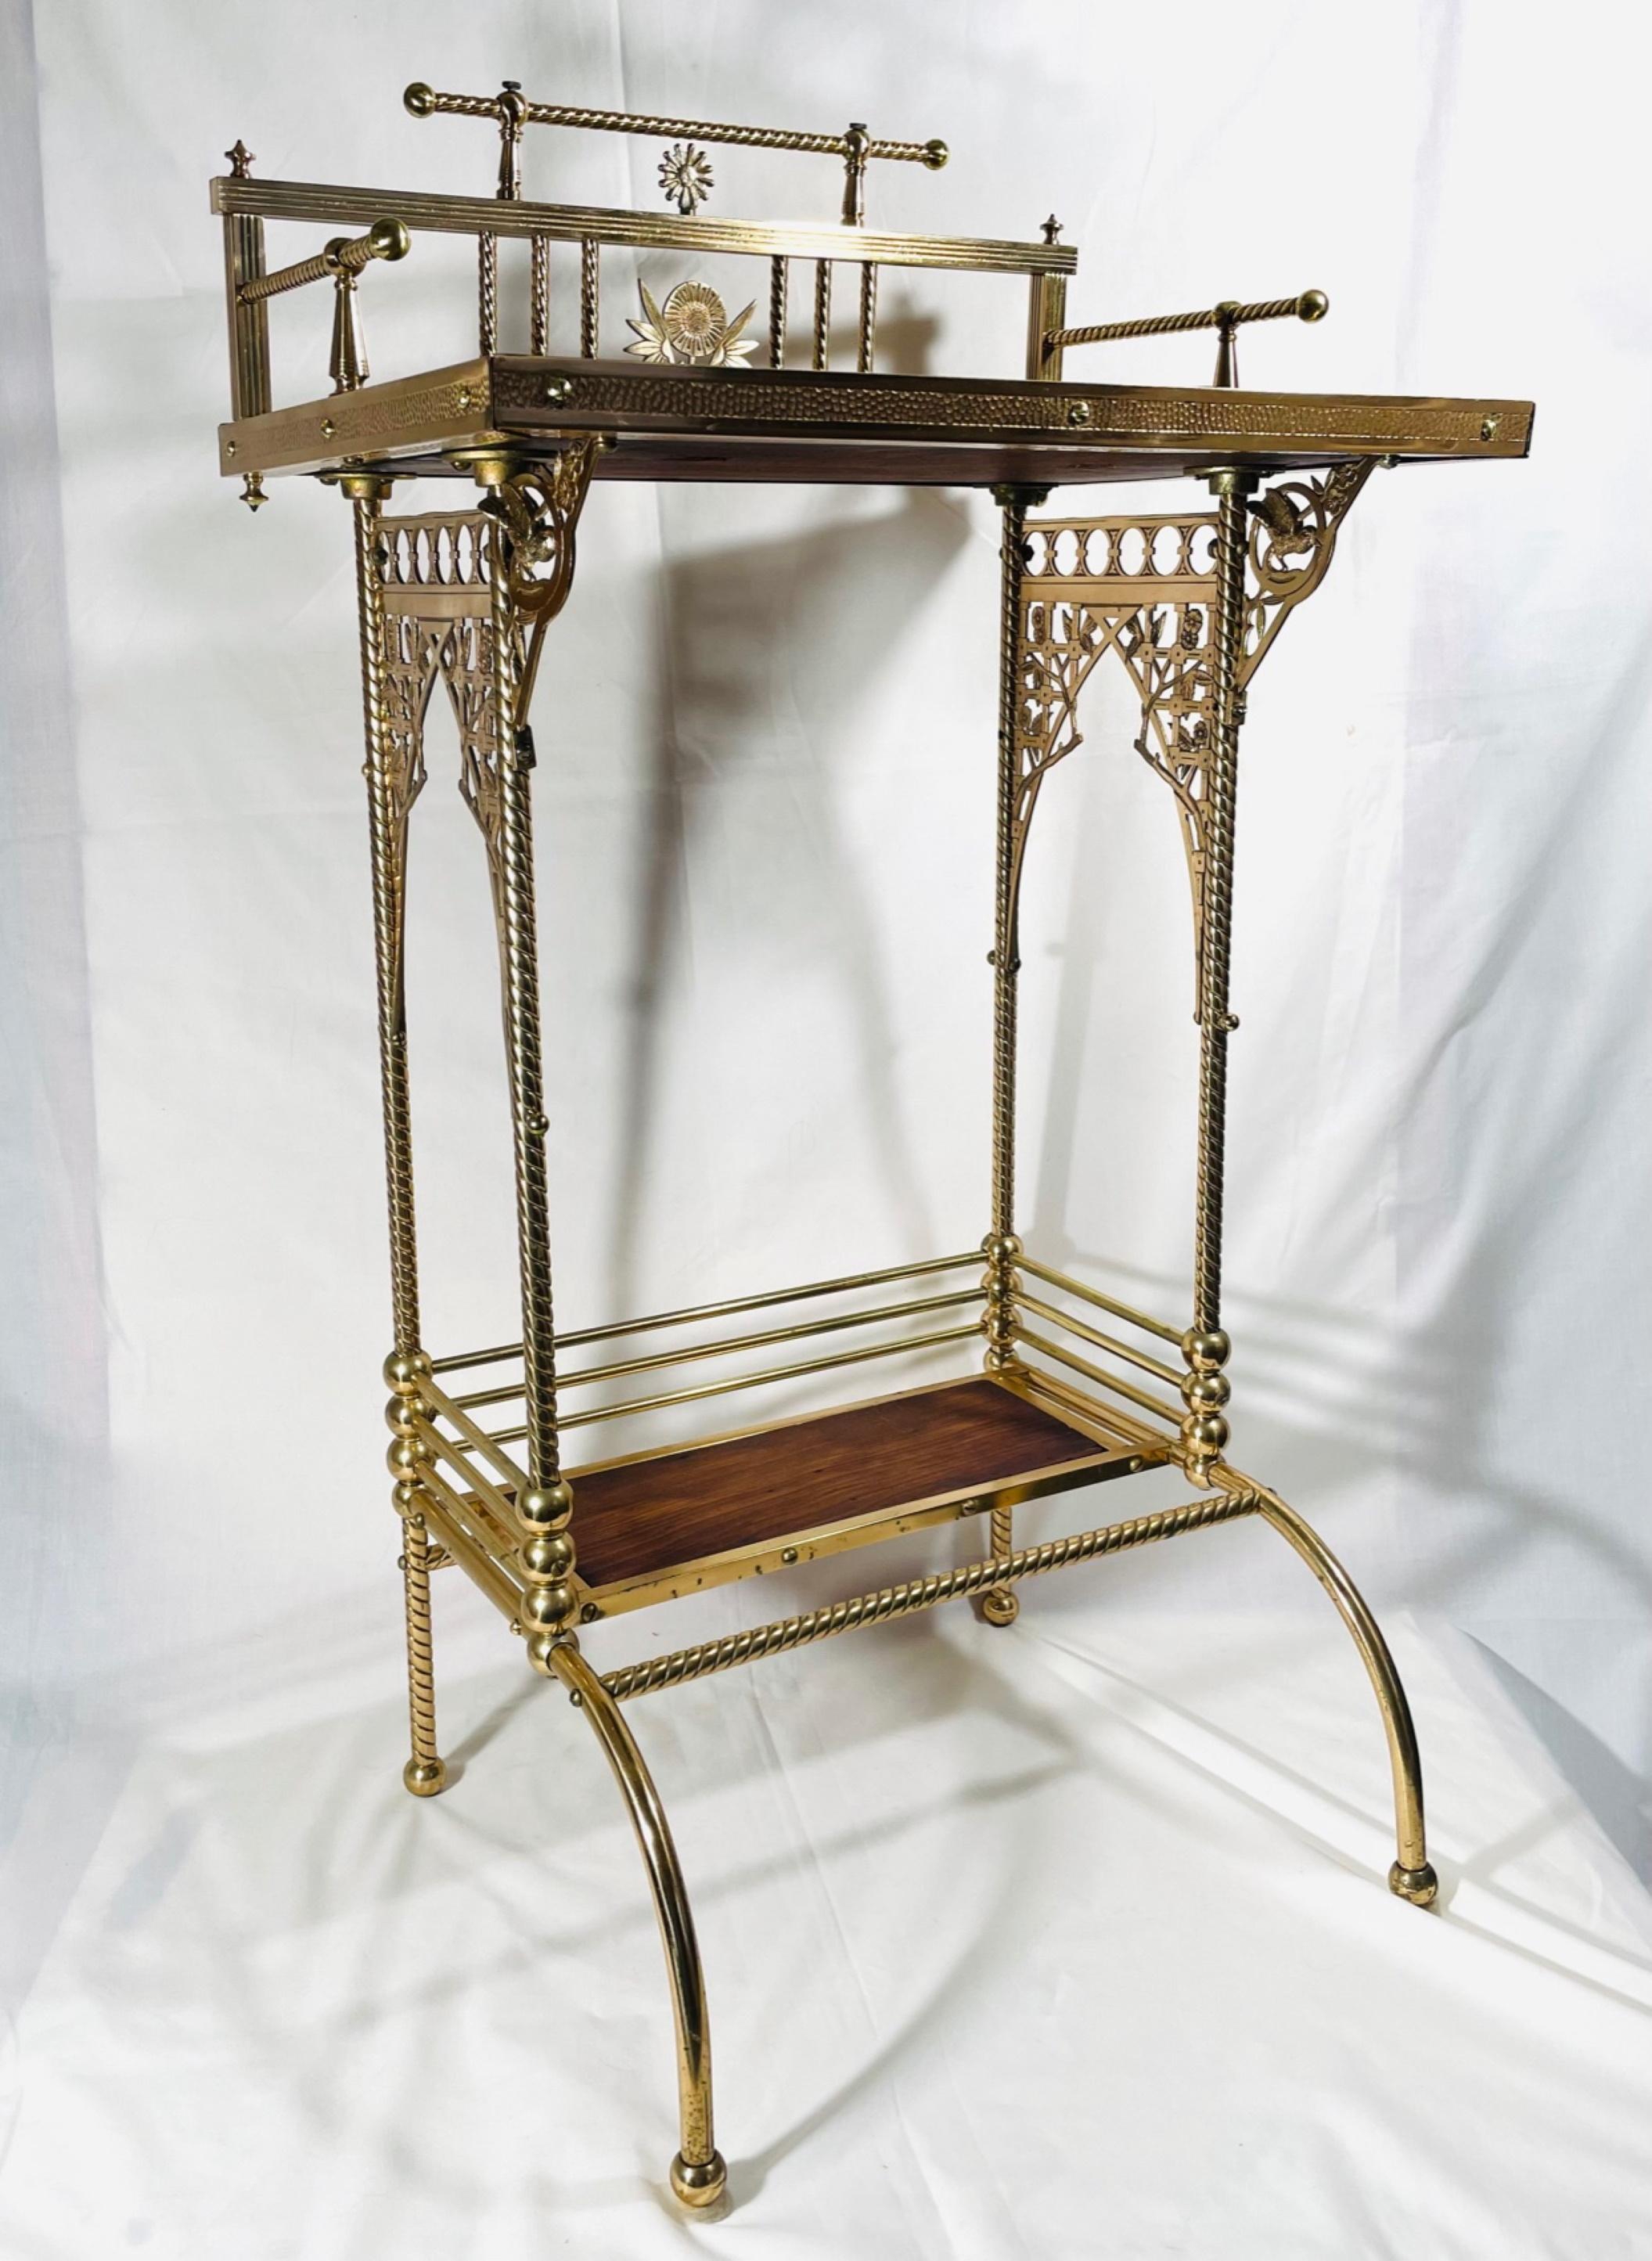 Charles Parker aesthetic movement brass telephone table stand, ca. 1880

This rare, one of a few known, brass table by the Charles Parker Company is an exceptional example of the American Aesthetic Movement. Elegant brass frame is designed in bent